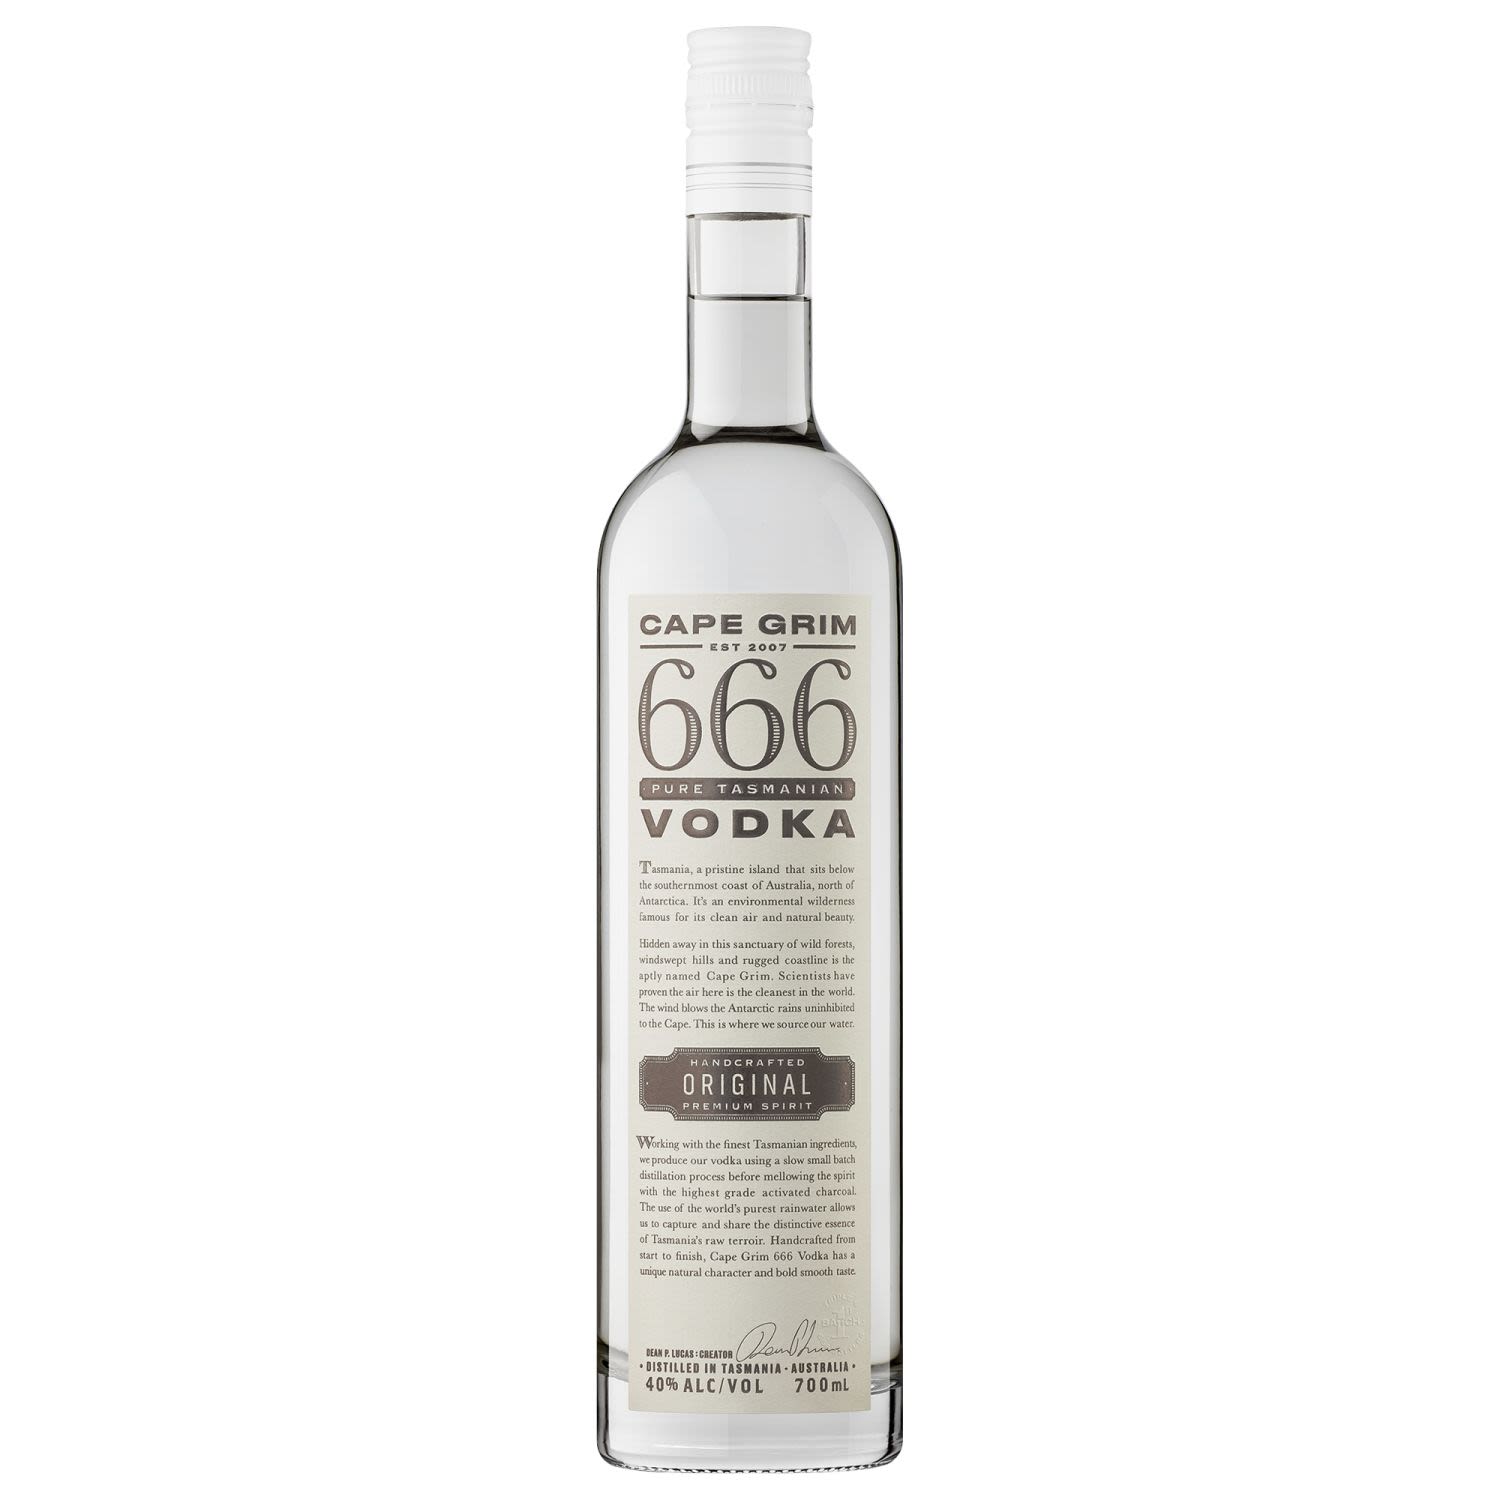 Creamy and medium bodied with subtle sweet hints of marshmallow, toasted almond and vanilla crÃ¨me anglaise, followed by spicy notes of bush pepper and leafy oils.<br /> <br />Alcohol Volume: 40.00%<br /><br />Pack Format: Bottle<br /><br />Standard Drinks: 22</br /><br />Pack Type: Bottle<br /><br />Country of Origin: Australia<br />